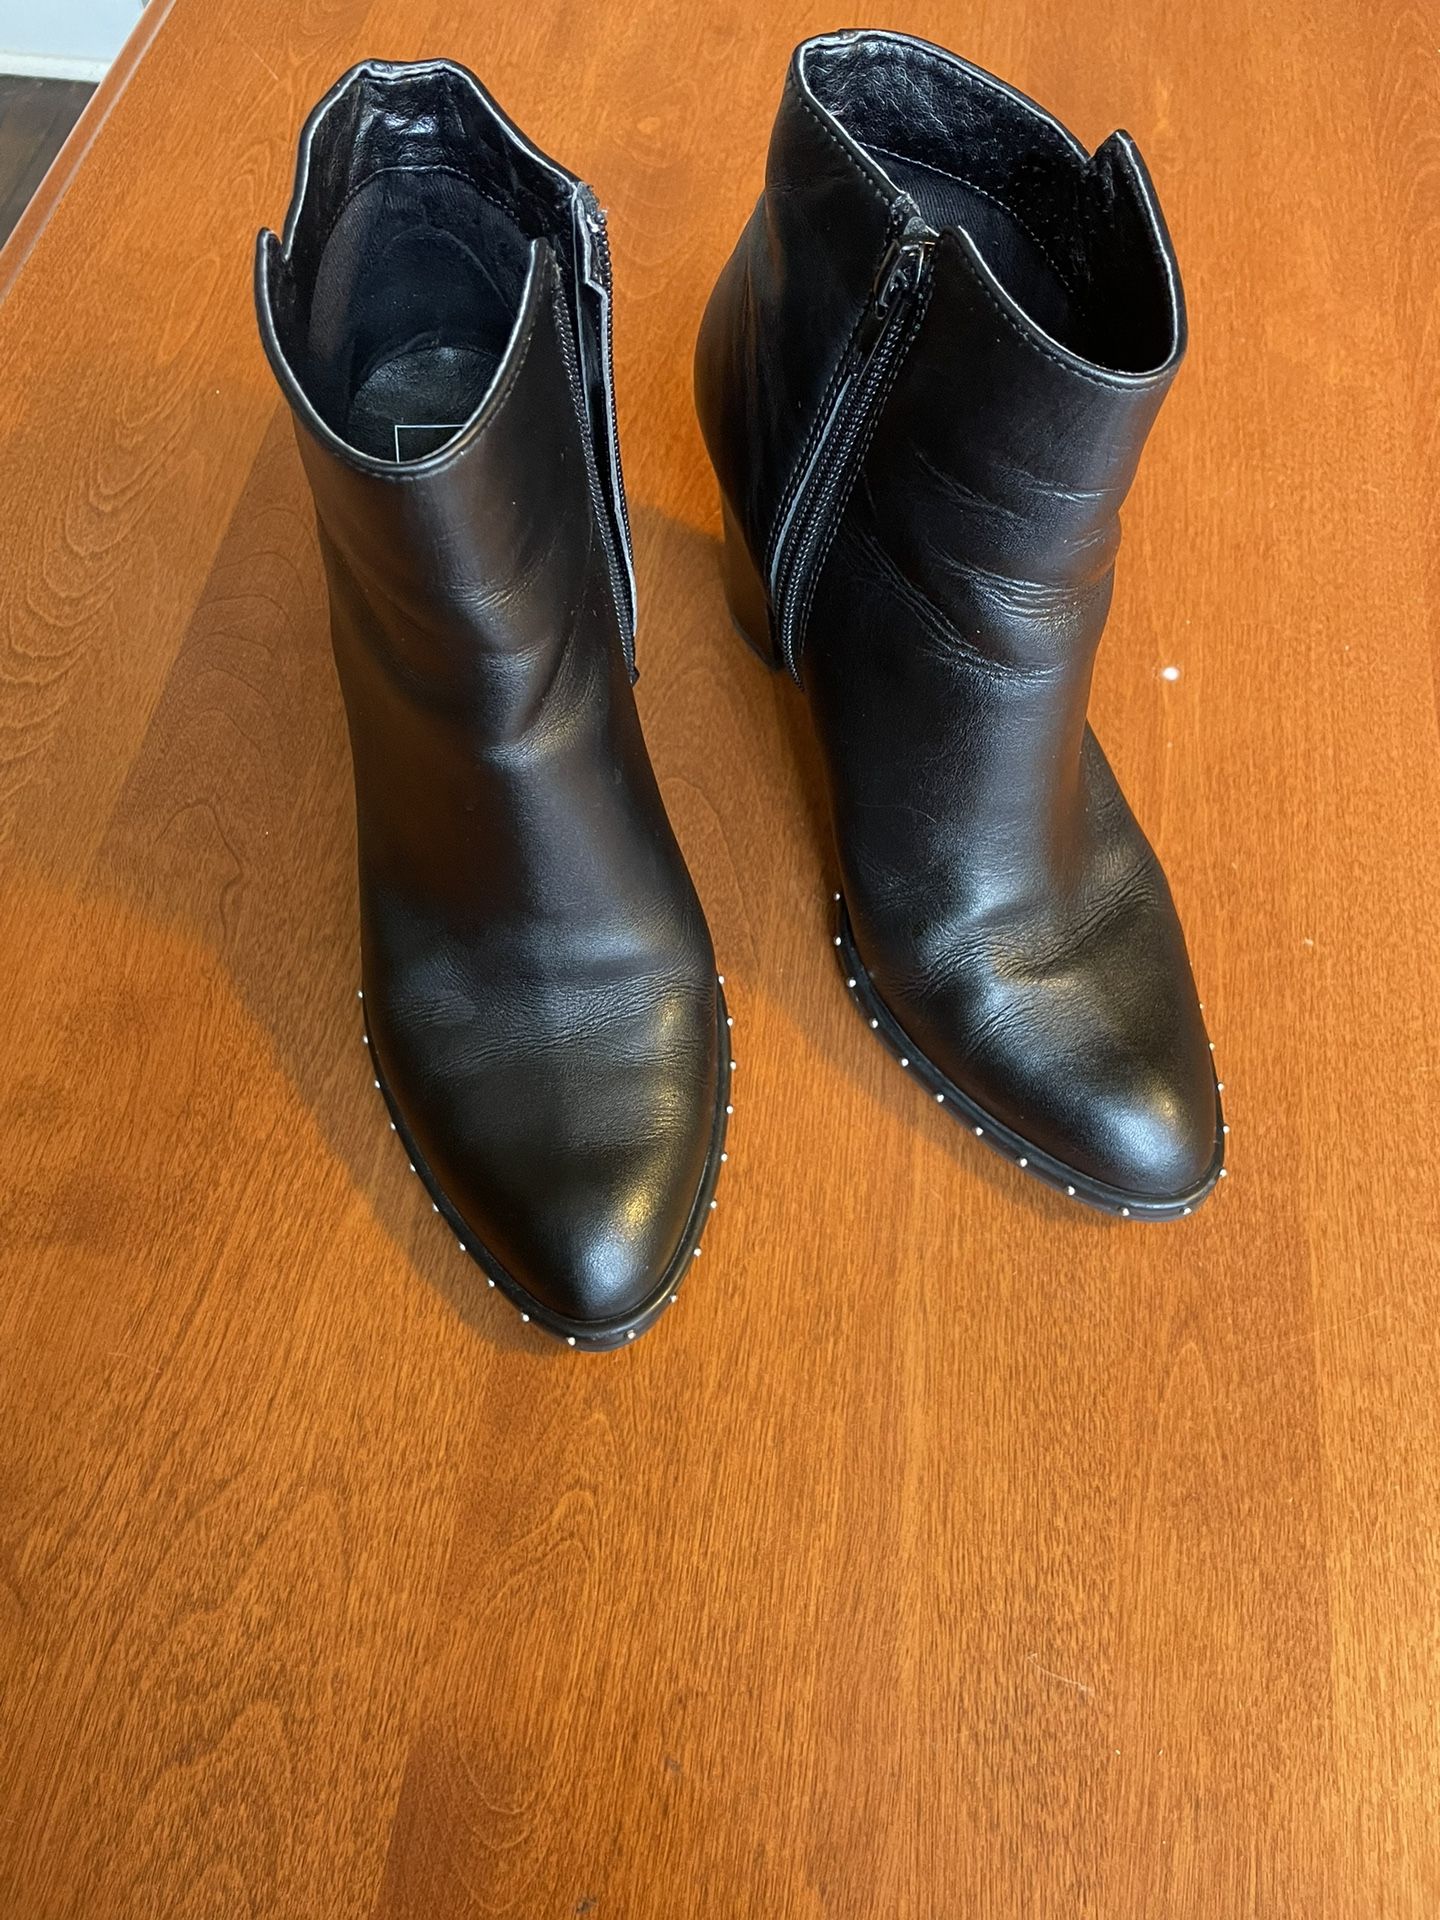 Black Ankle Boots, 5 1/2